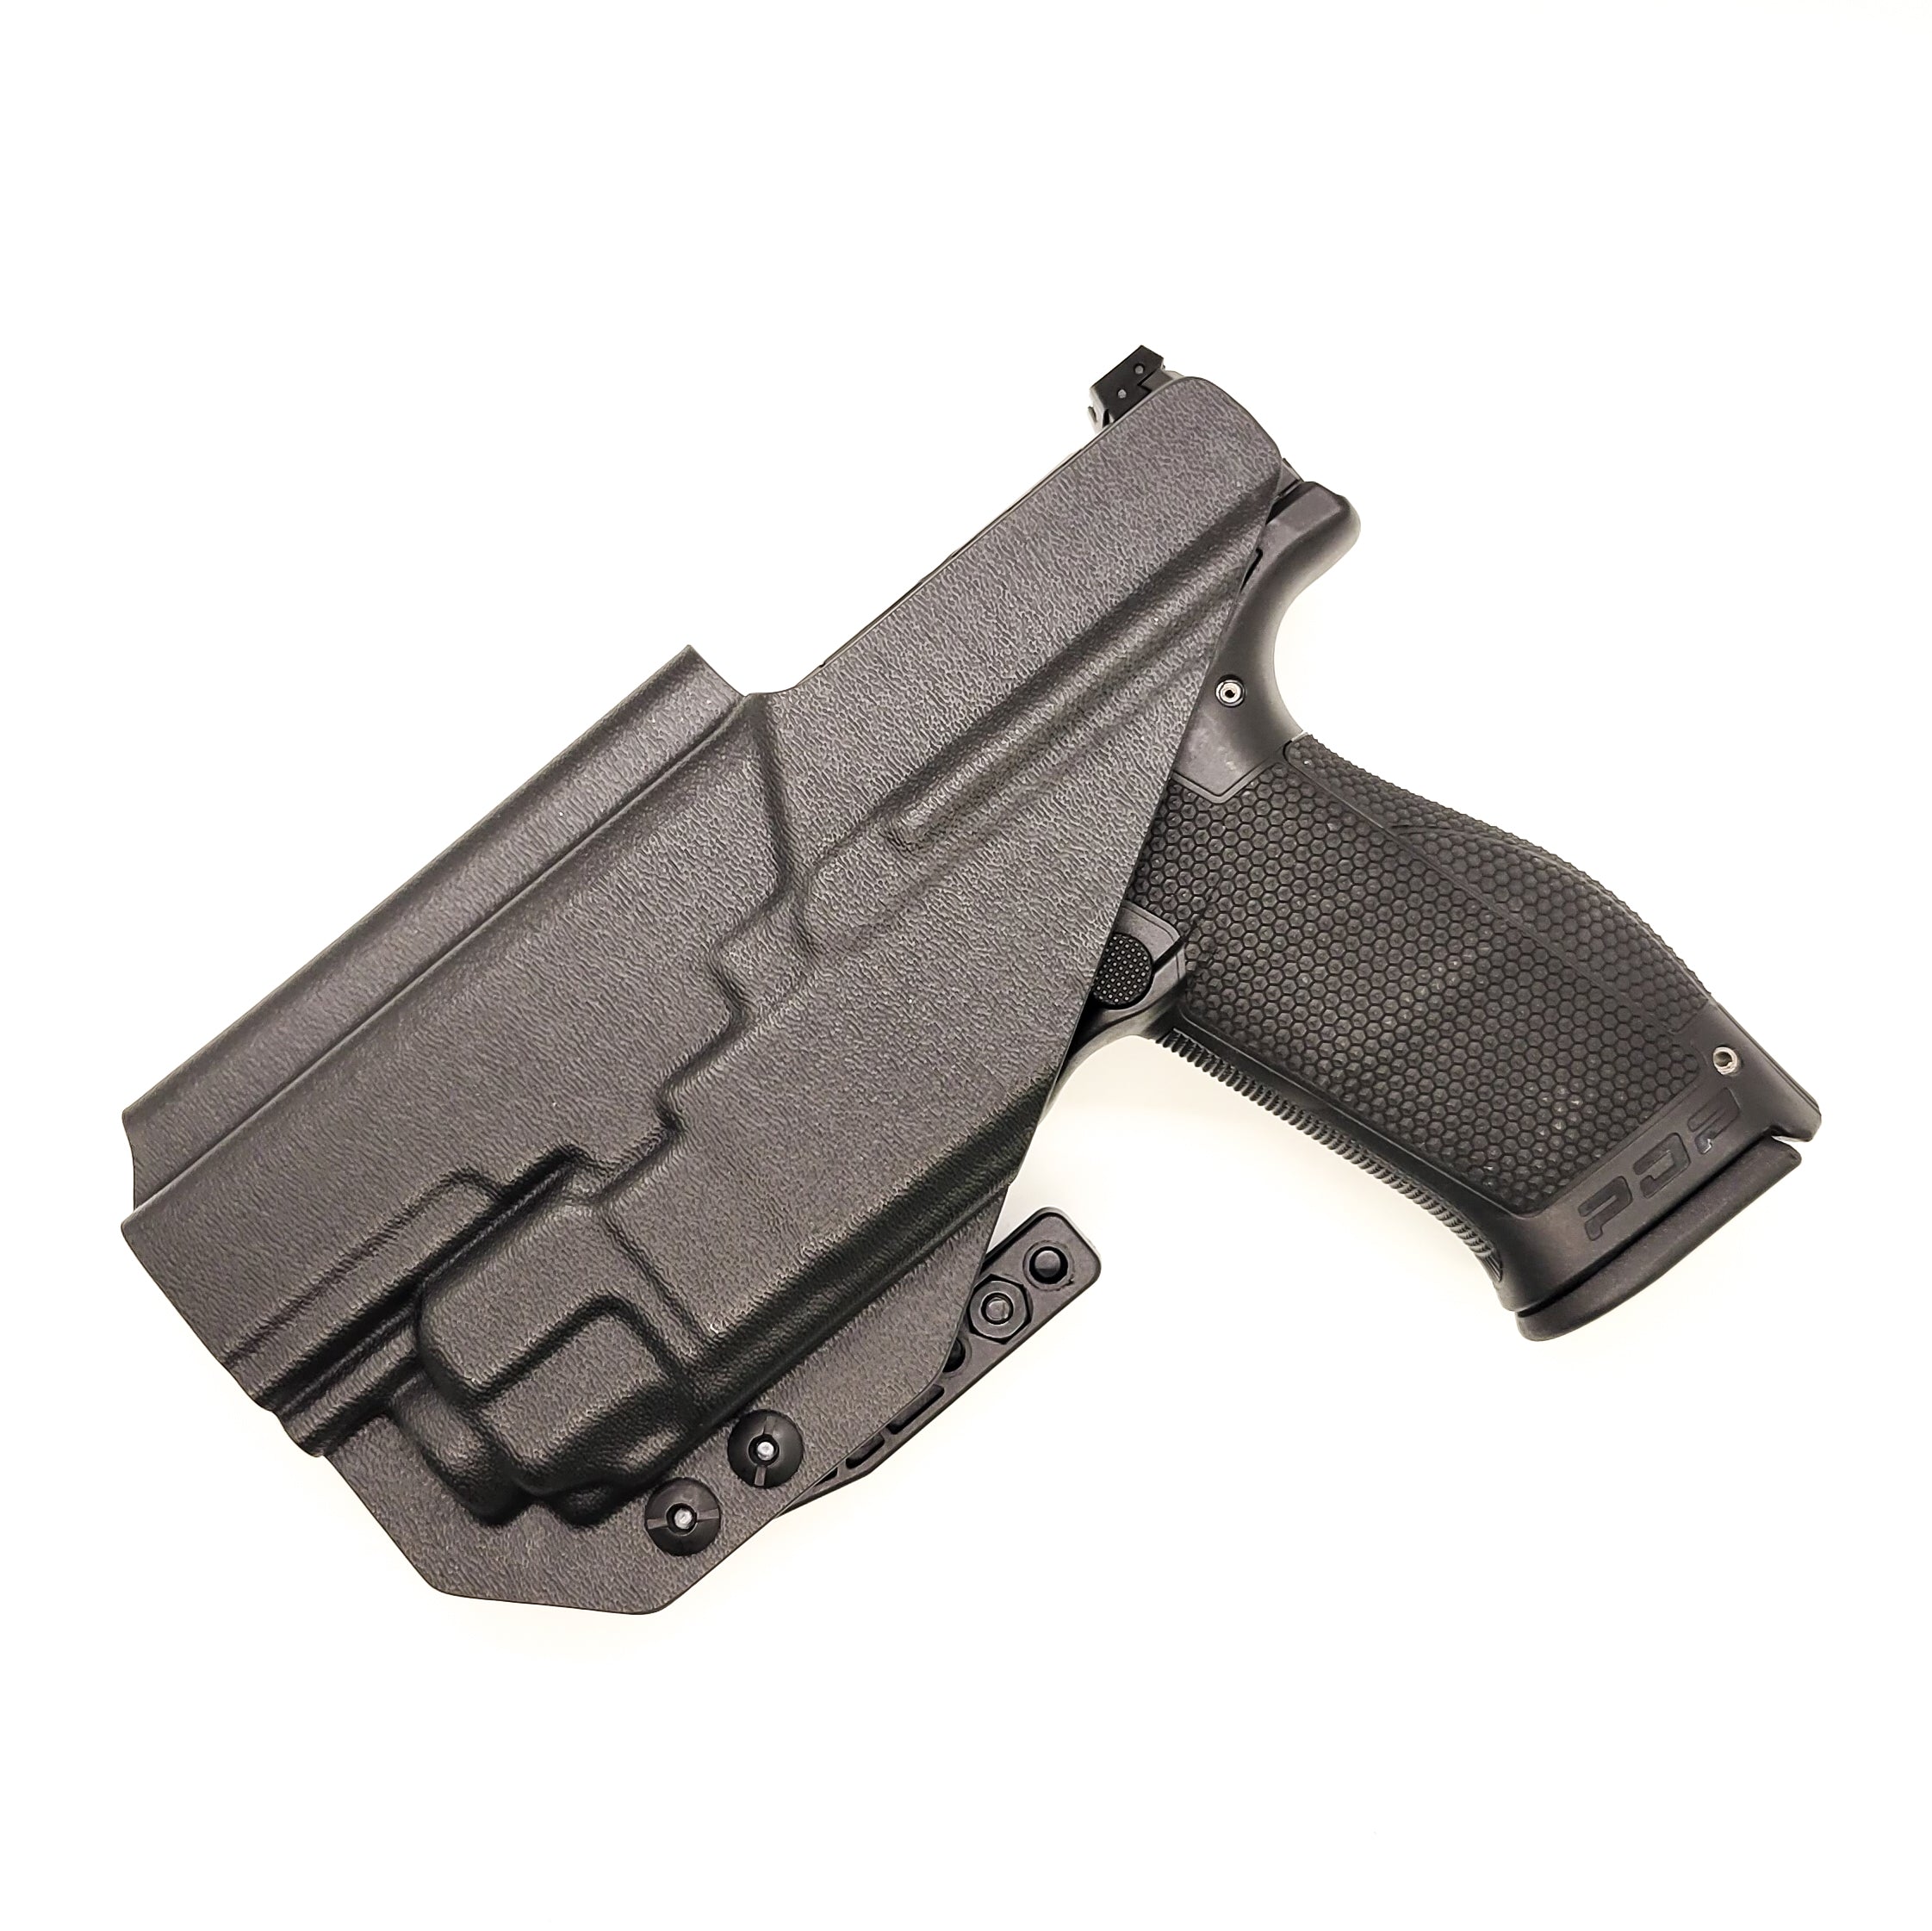 For the best concealed carry Inside Waistband IWB AIWB Holster designed to fit the Walther PDP 4.5" Full-Size pistol with the Streamlight TLR-8 mounted on the firearm, shop Four Brothers Holsters. Cut for red dot sight, full sweat guard, adjustable retention & open muzzle for threaded barrels & compensators.